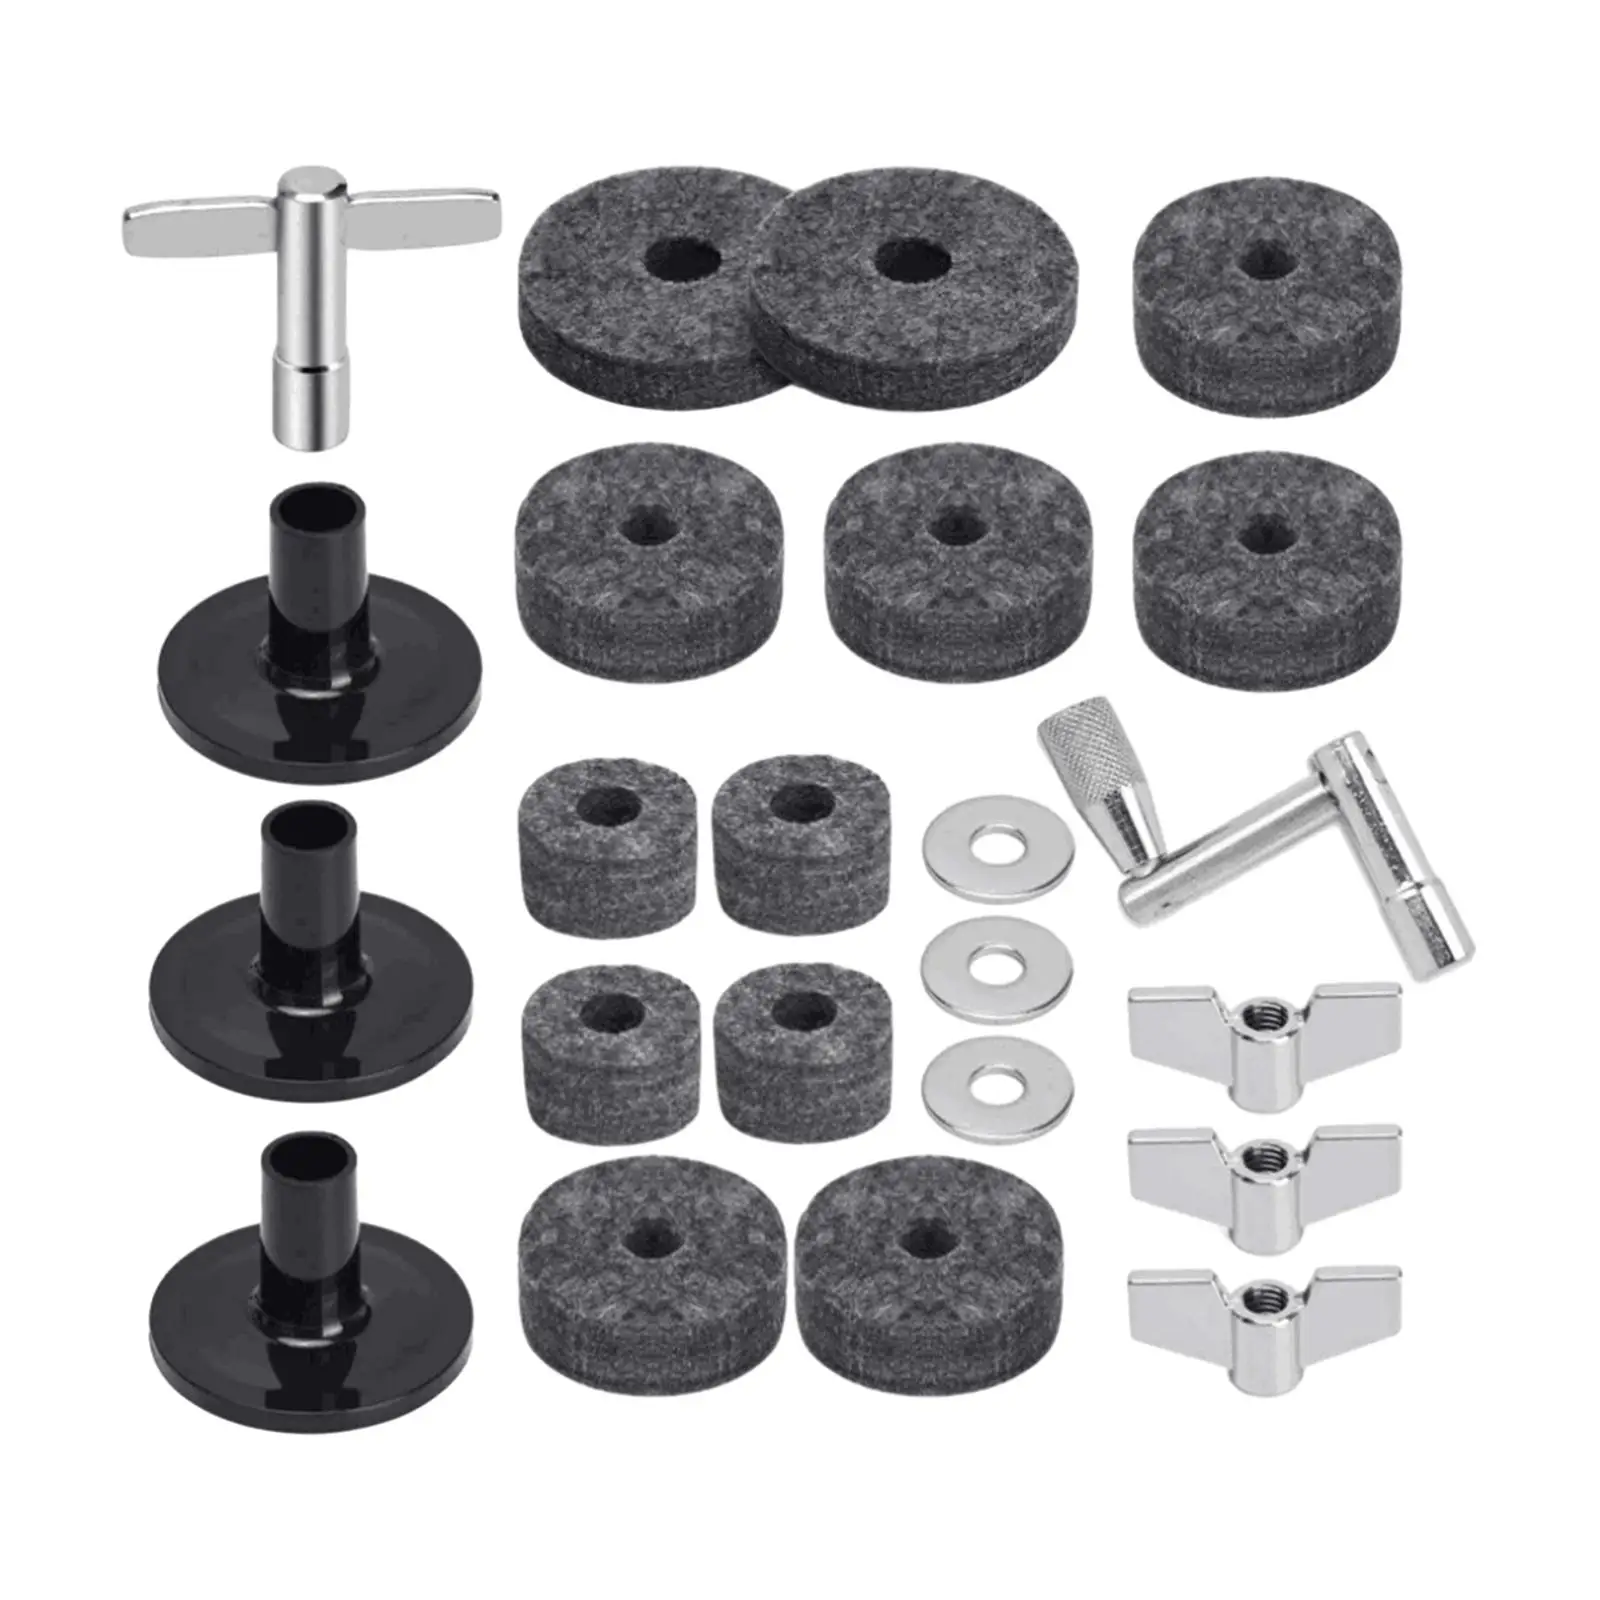 23Pcs Cymbal Replacement Accessories, High Hat Clutch Cup Felt Percussion Instrument Accessories Cymbal Sleeves Drum Sleeve